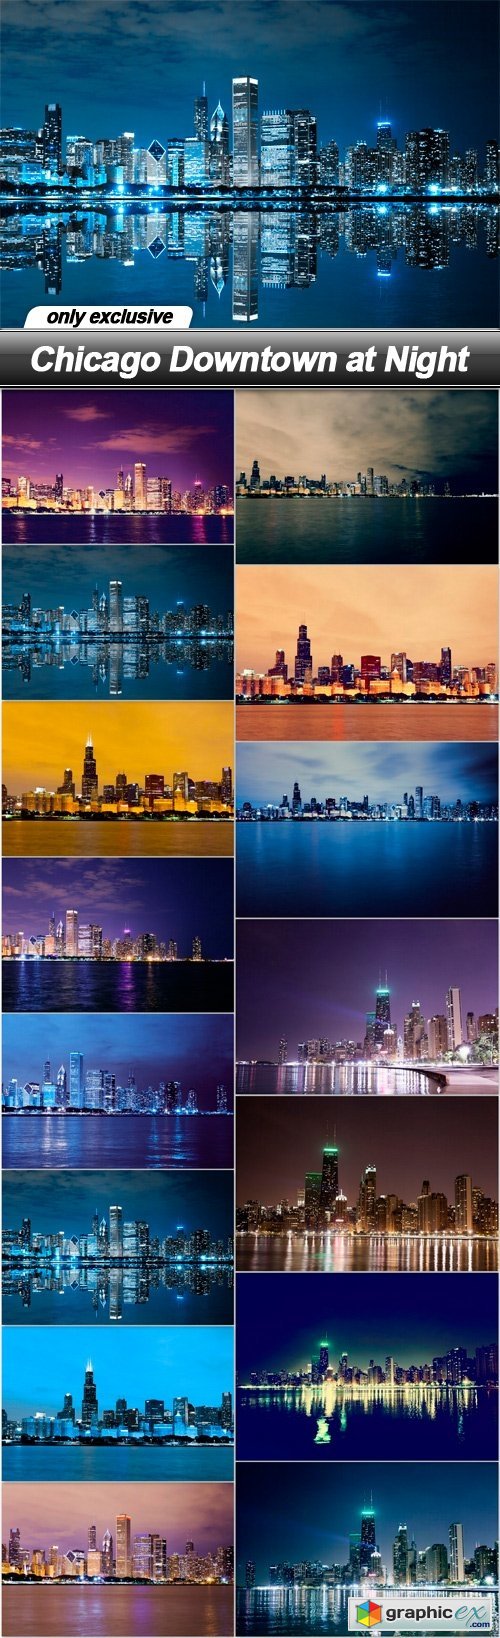 Chicago Downtown at Night - 15 UHQ JPEG